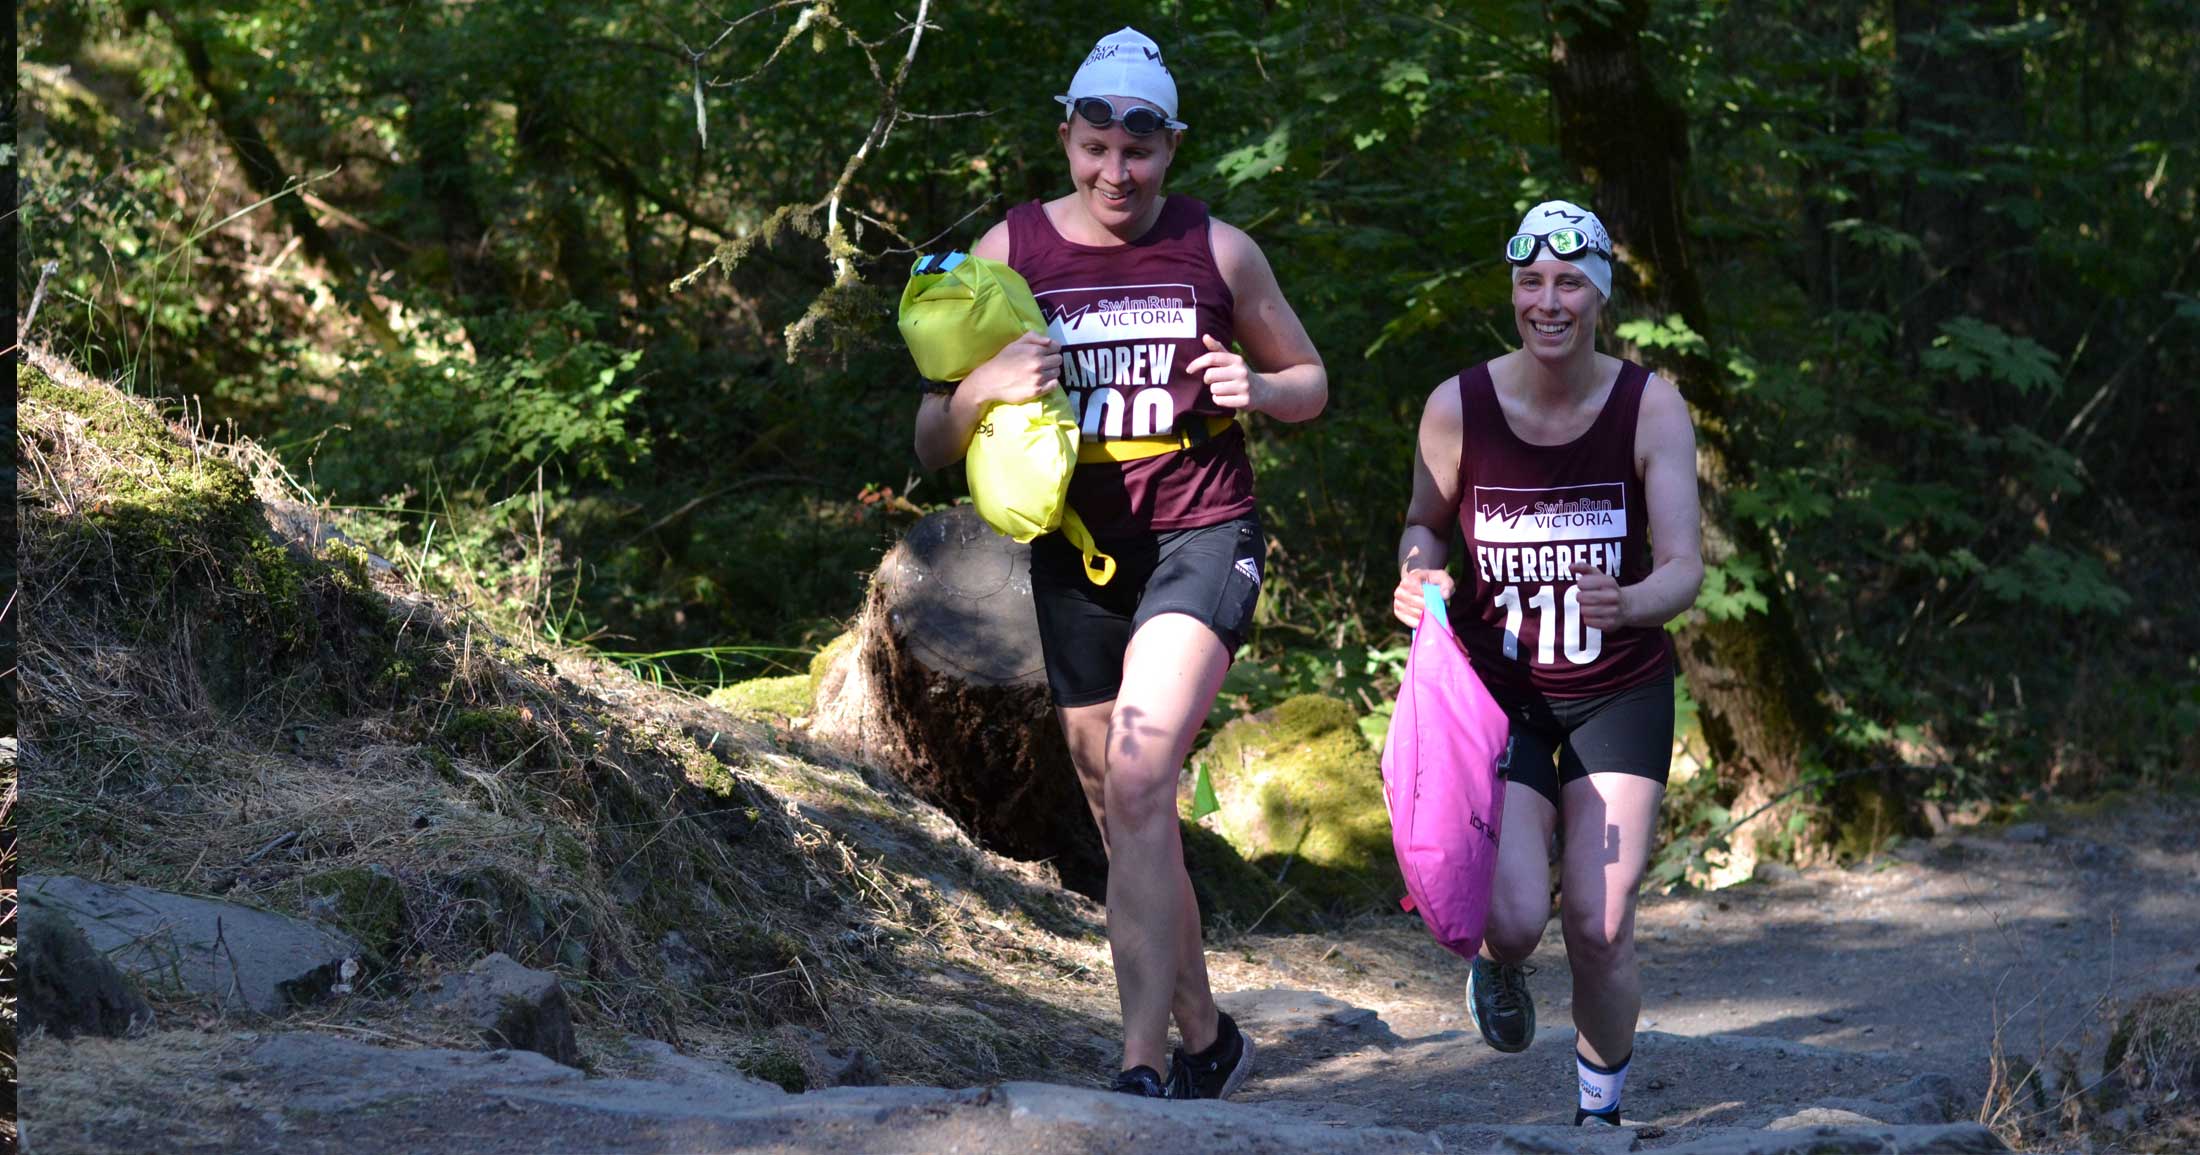 Two athletes race together, smiling, through the forest trail on their way to the next swim leg.